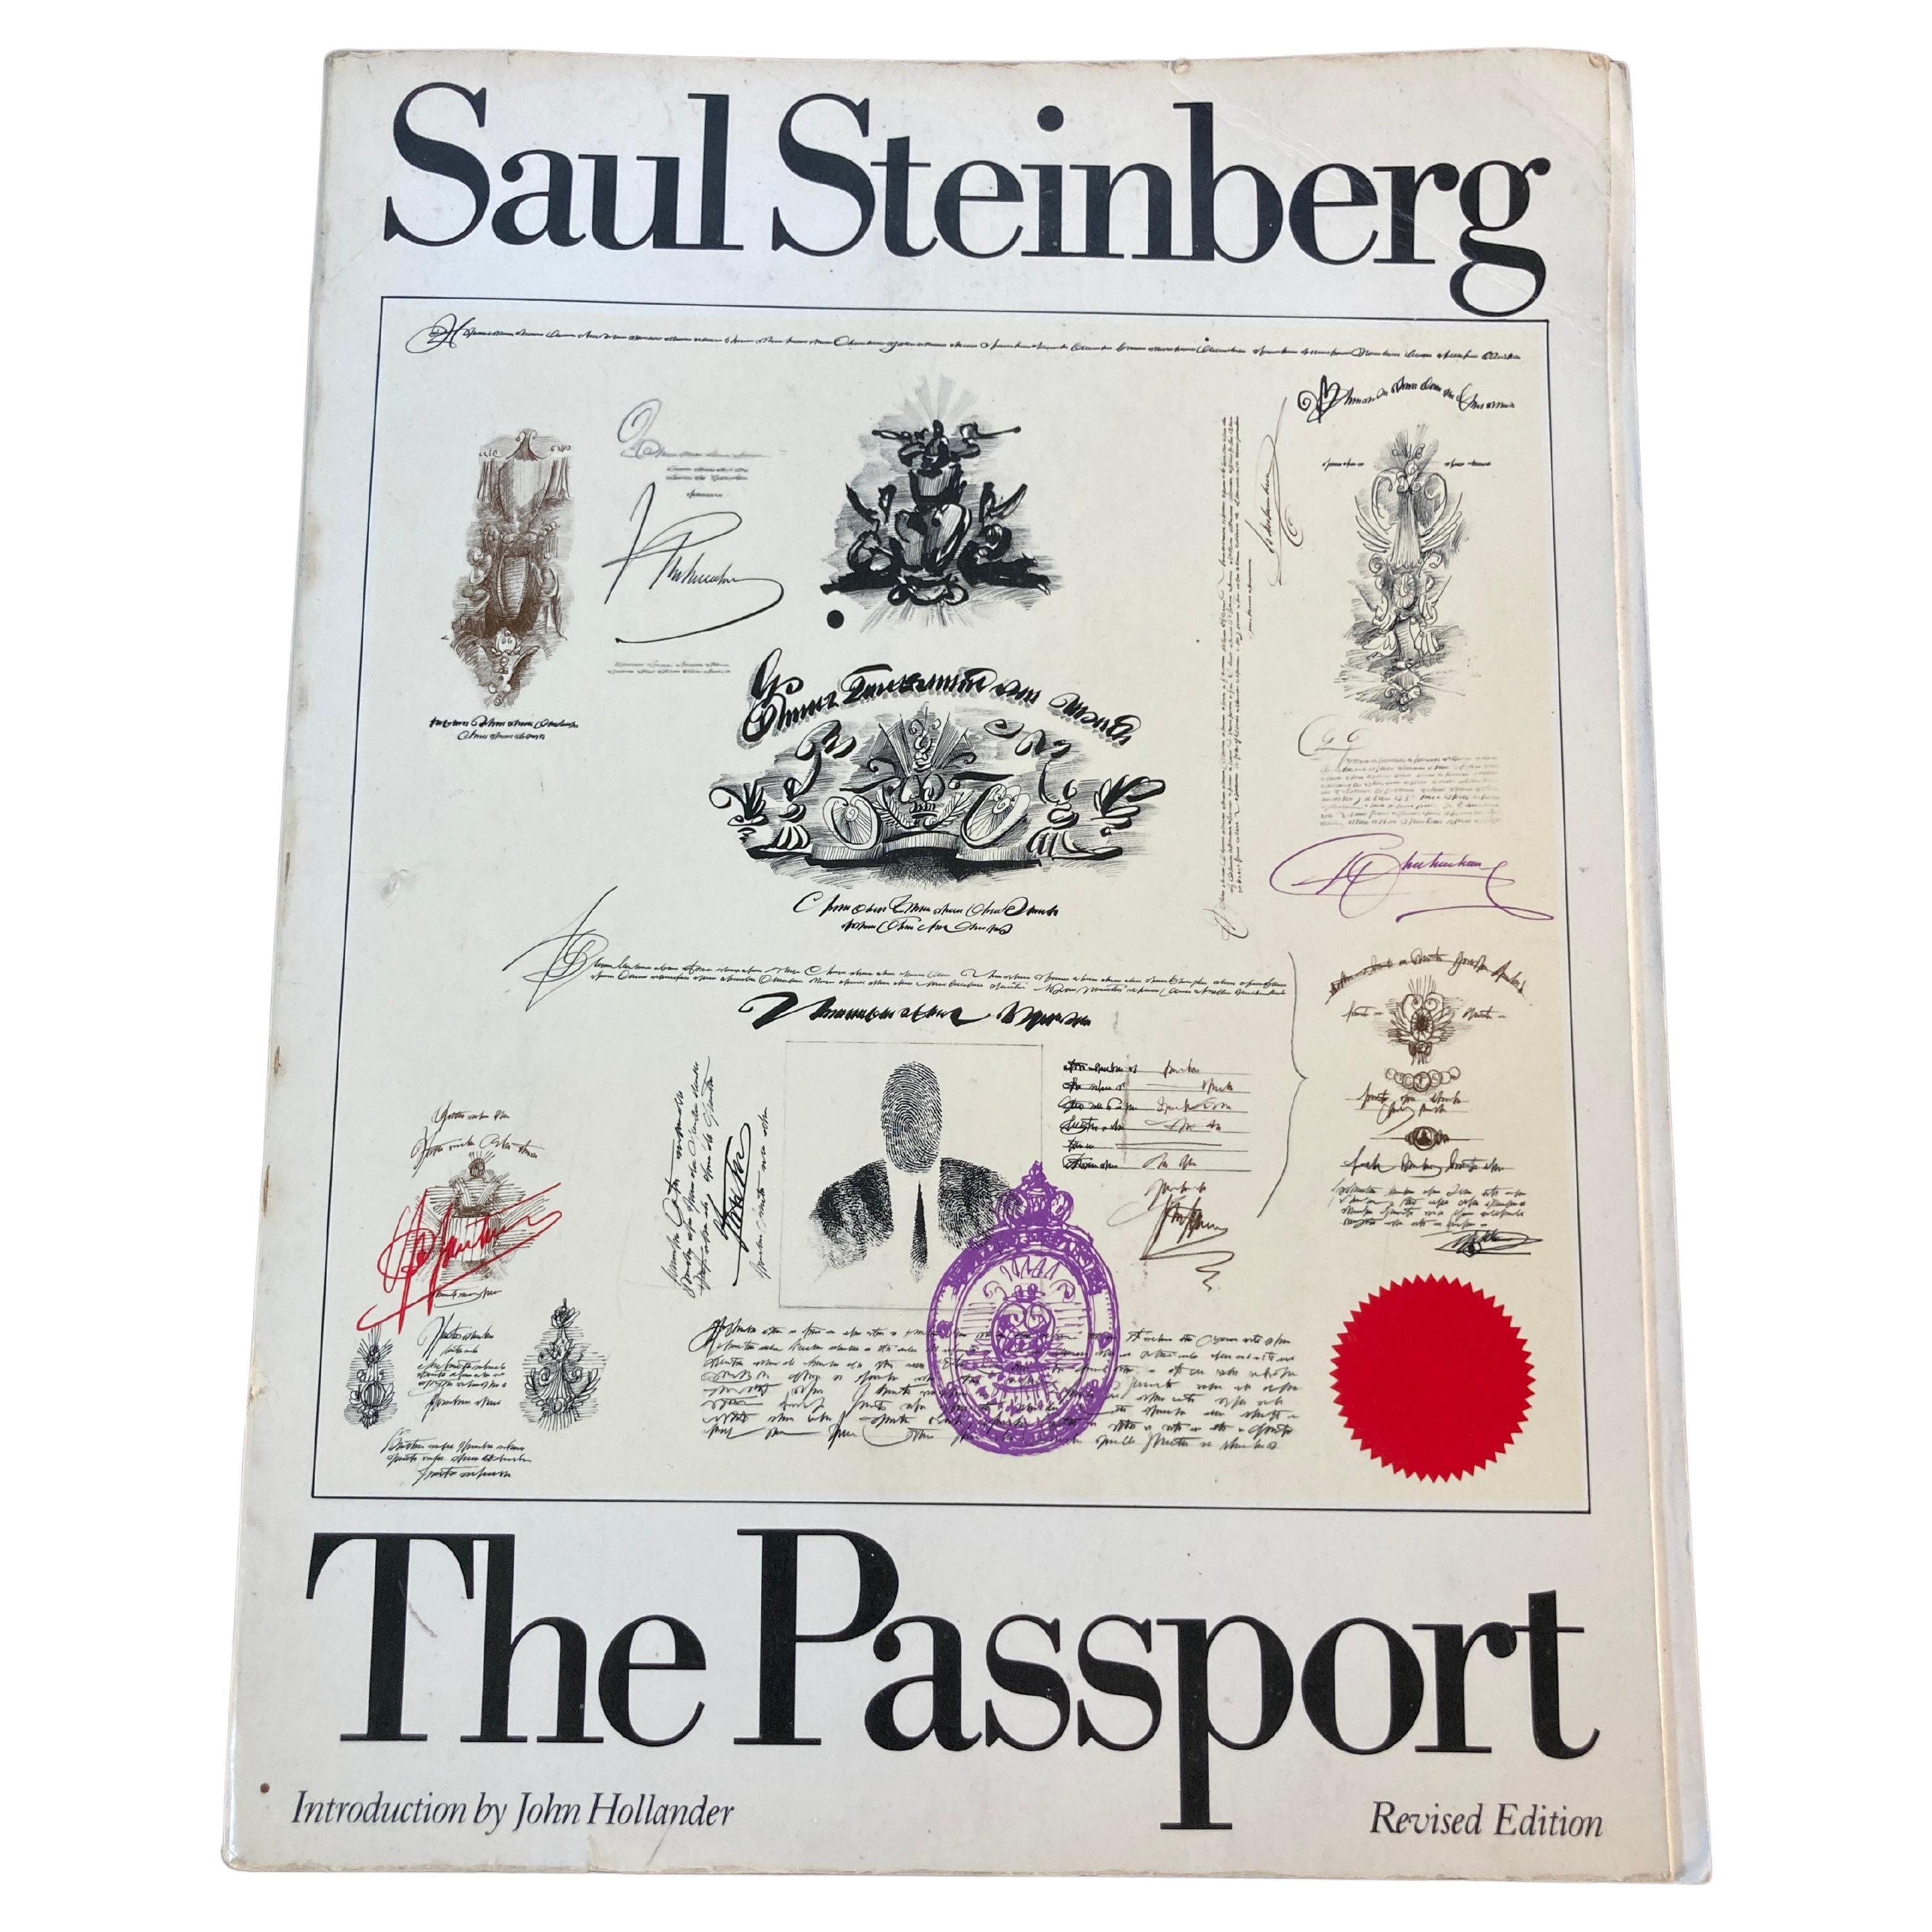 Passport Saul Steinberg Published by Harper & Brothers, New York., 1979